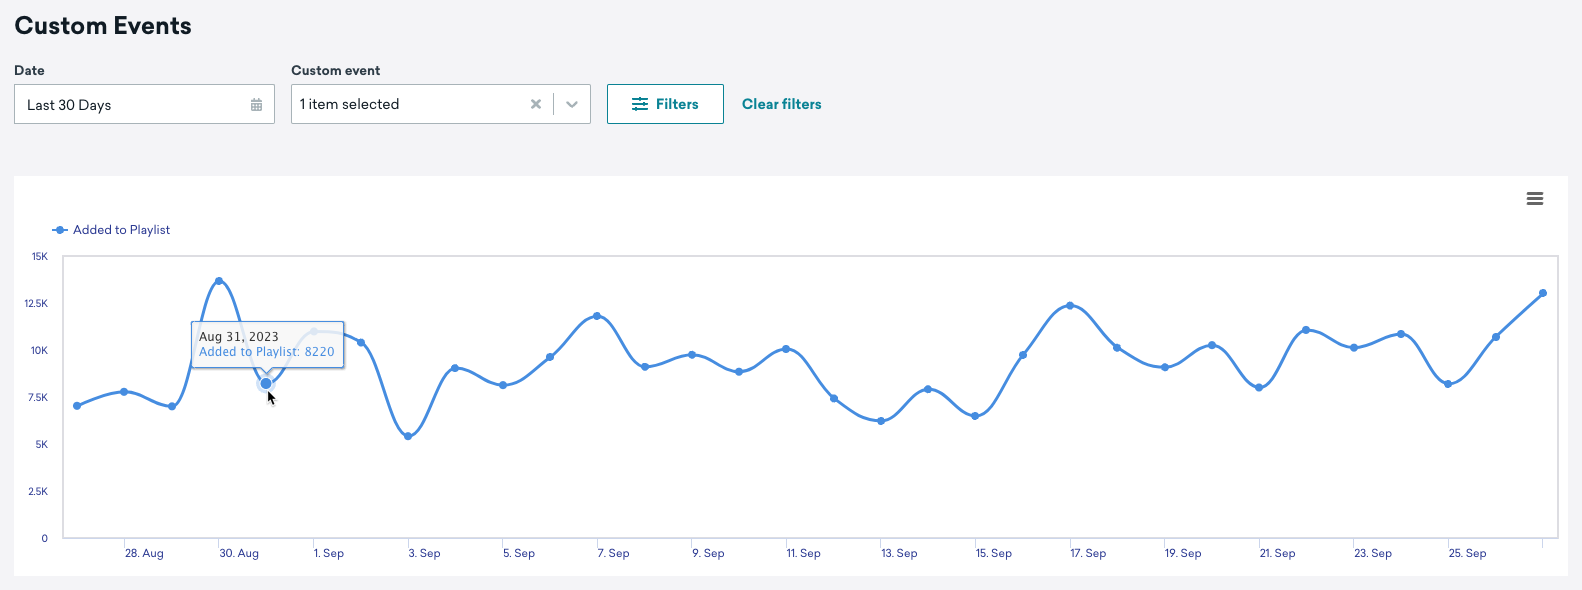 Custom event counts graph on the Custom Events page in the dashboard showing trends for two different custom events